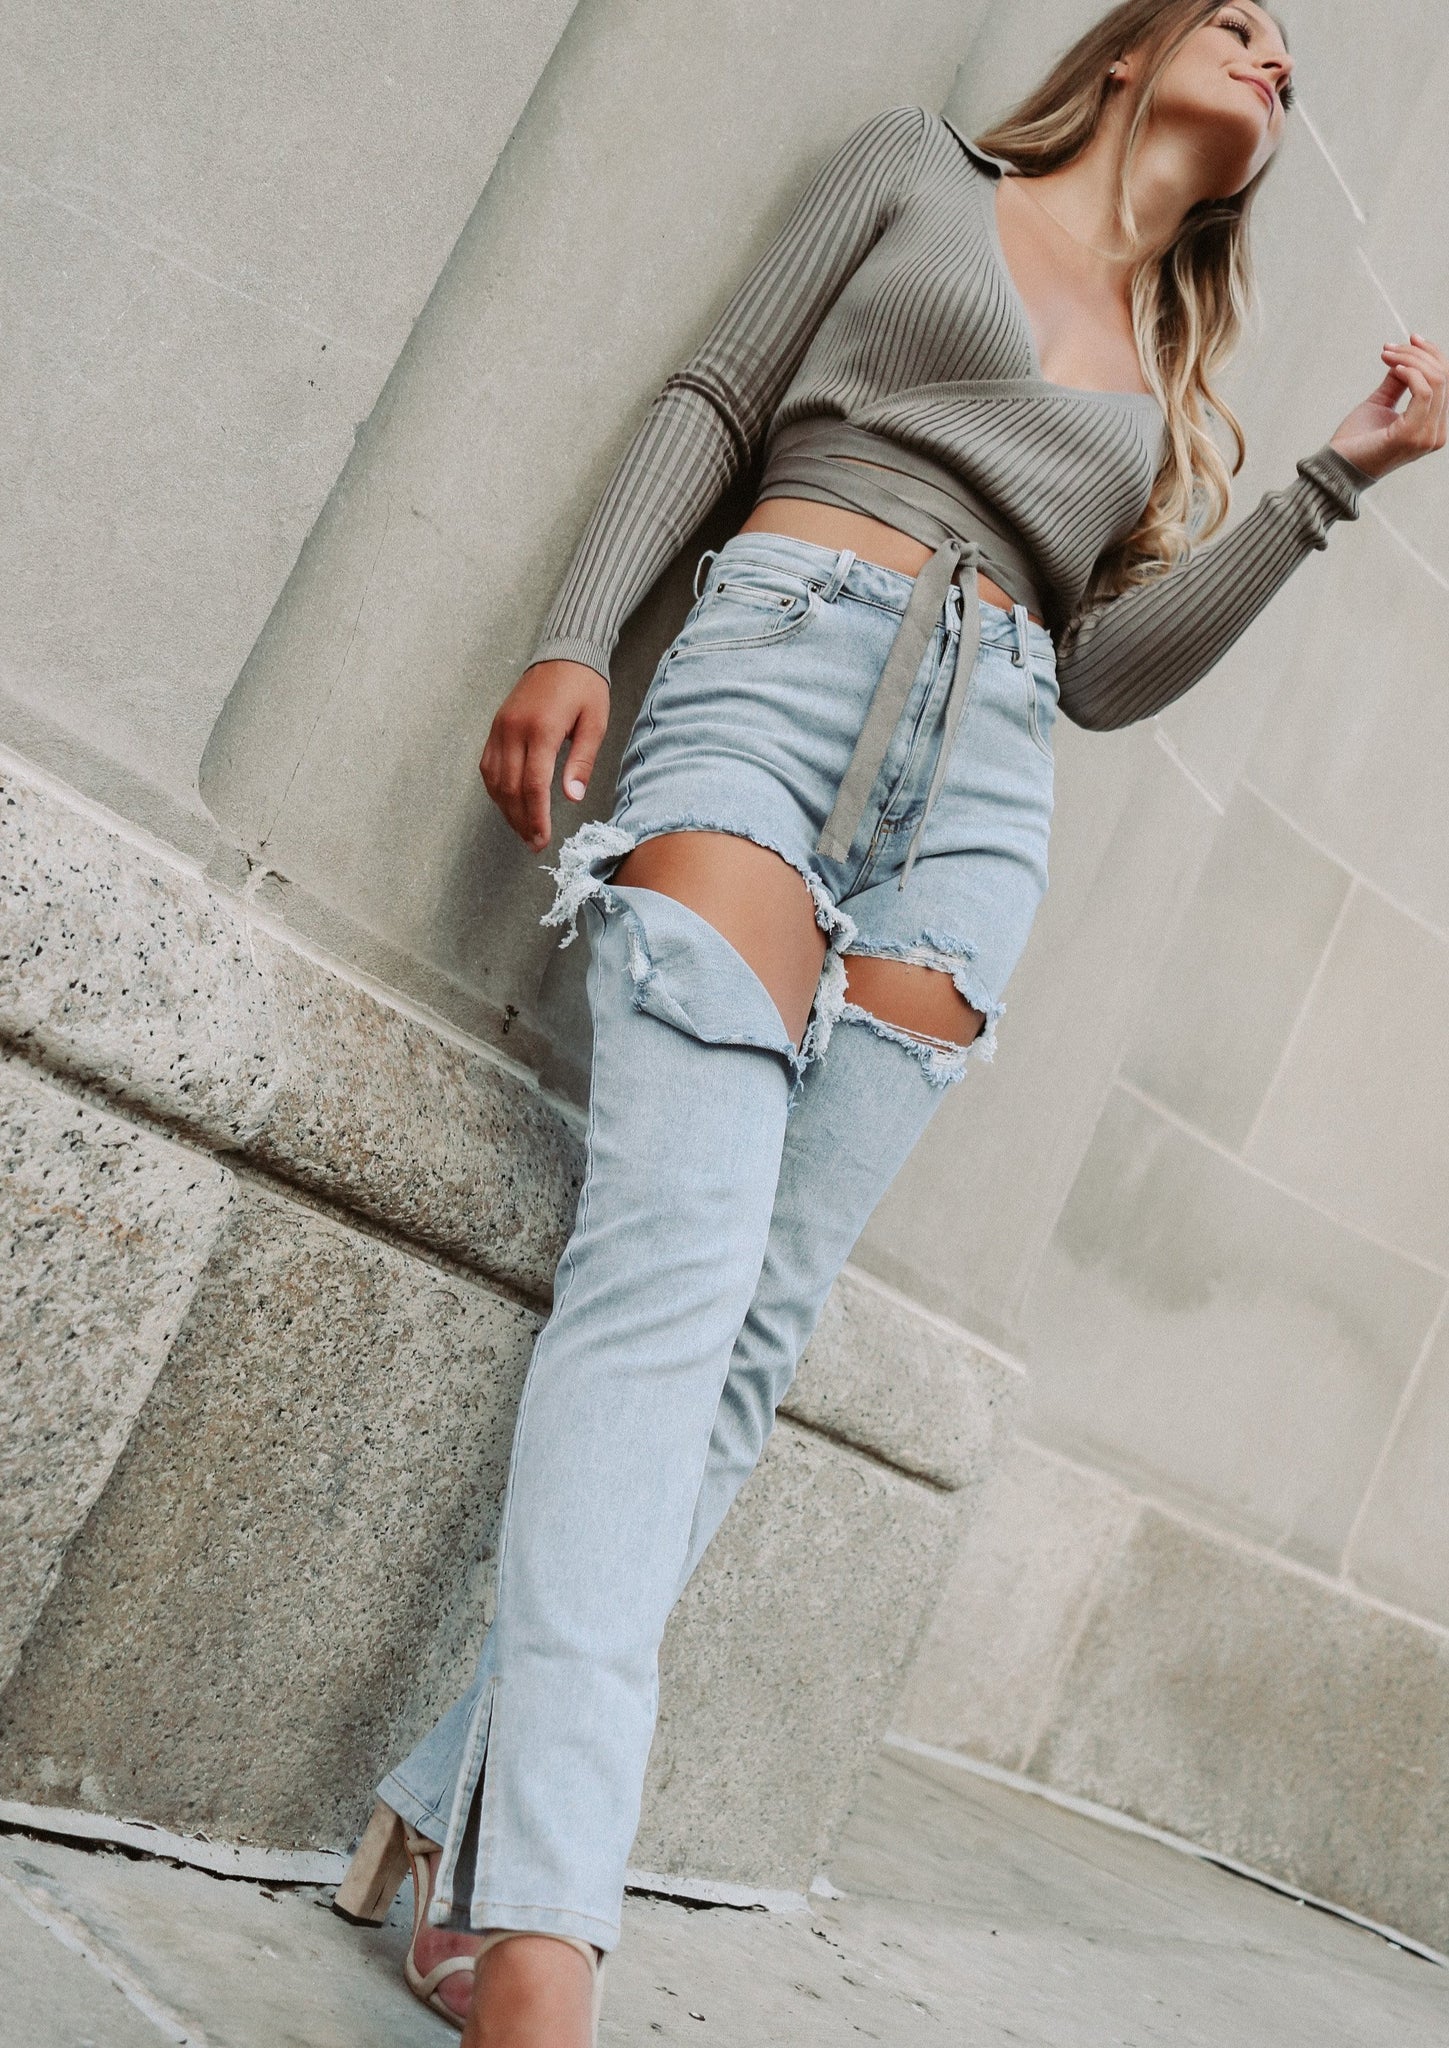 Product Image  Ripped jeans outfit, Cute ripped jeans, Best jeans